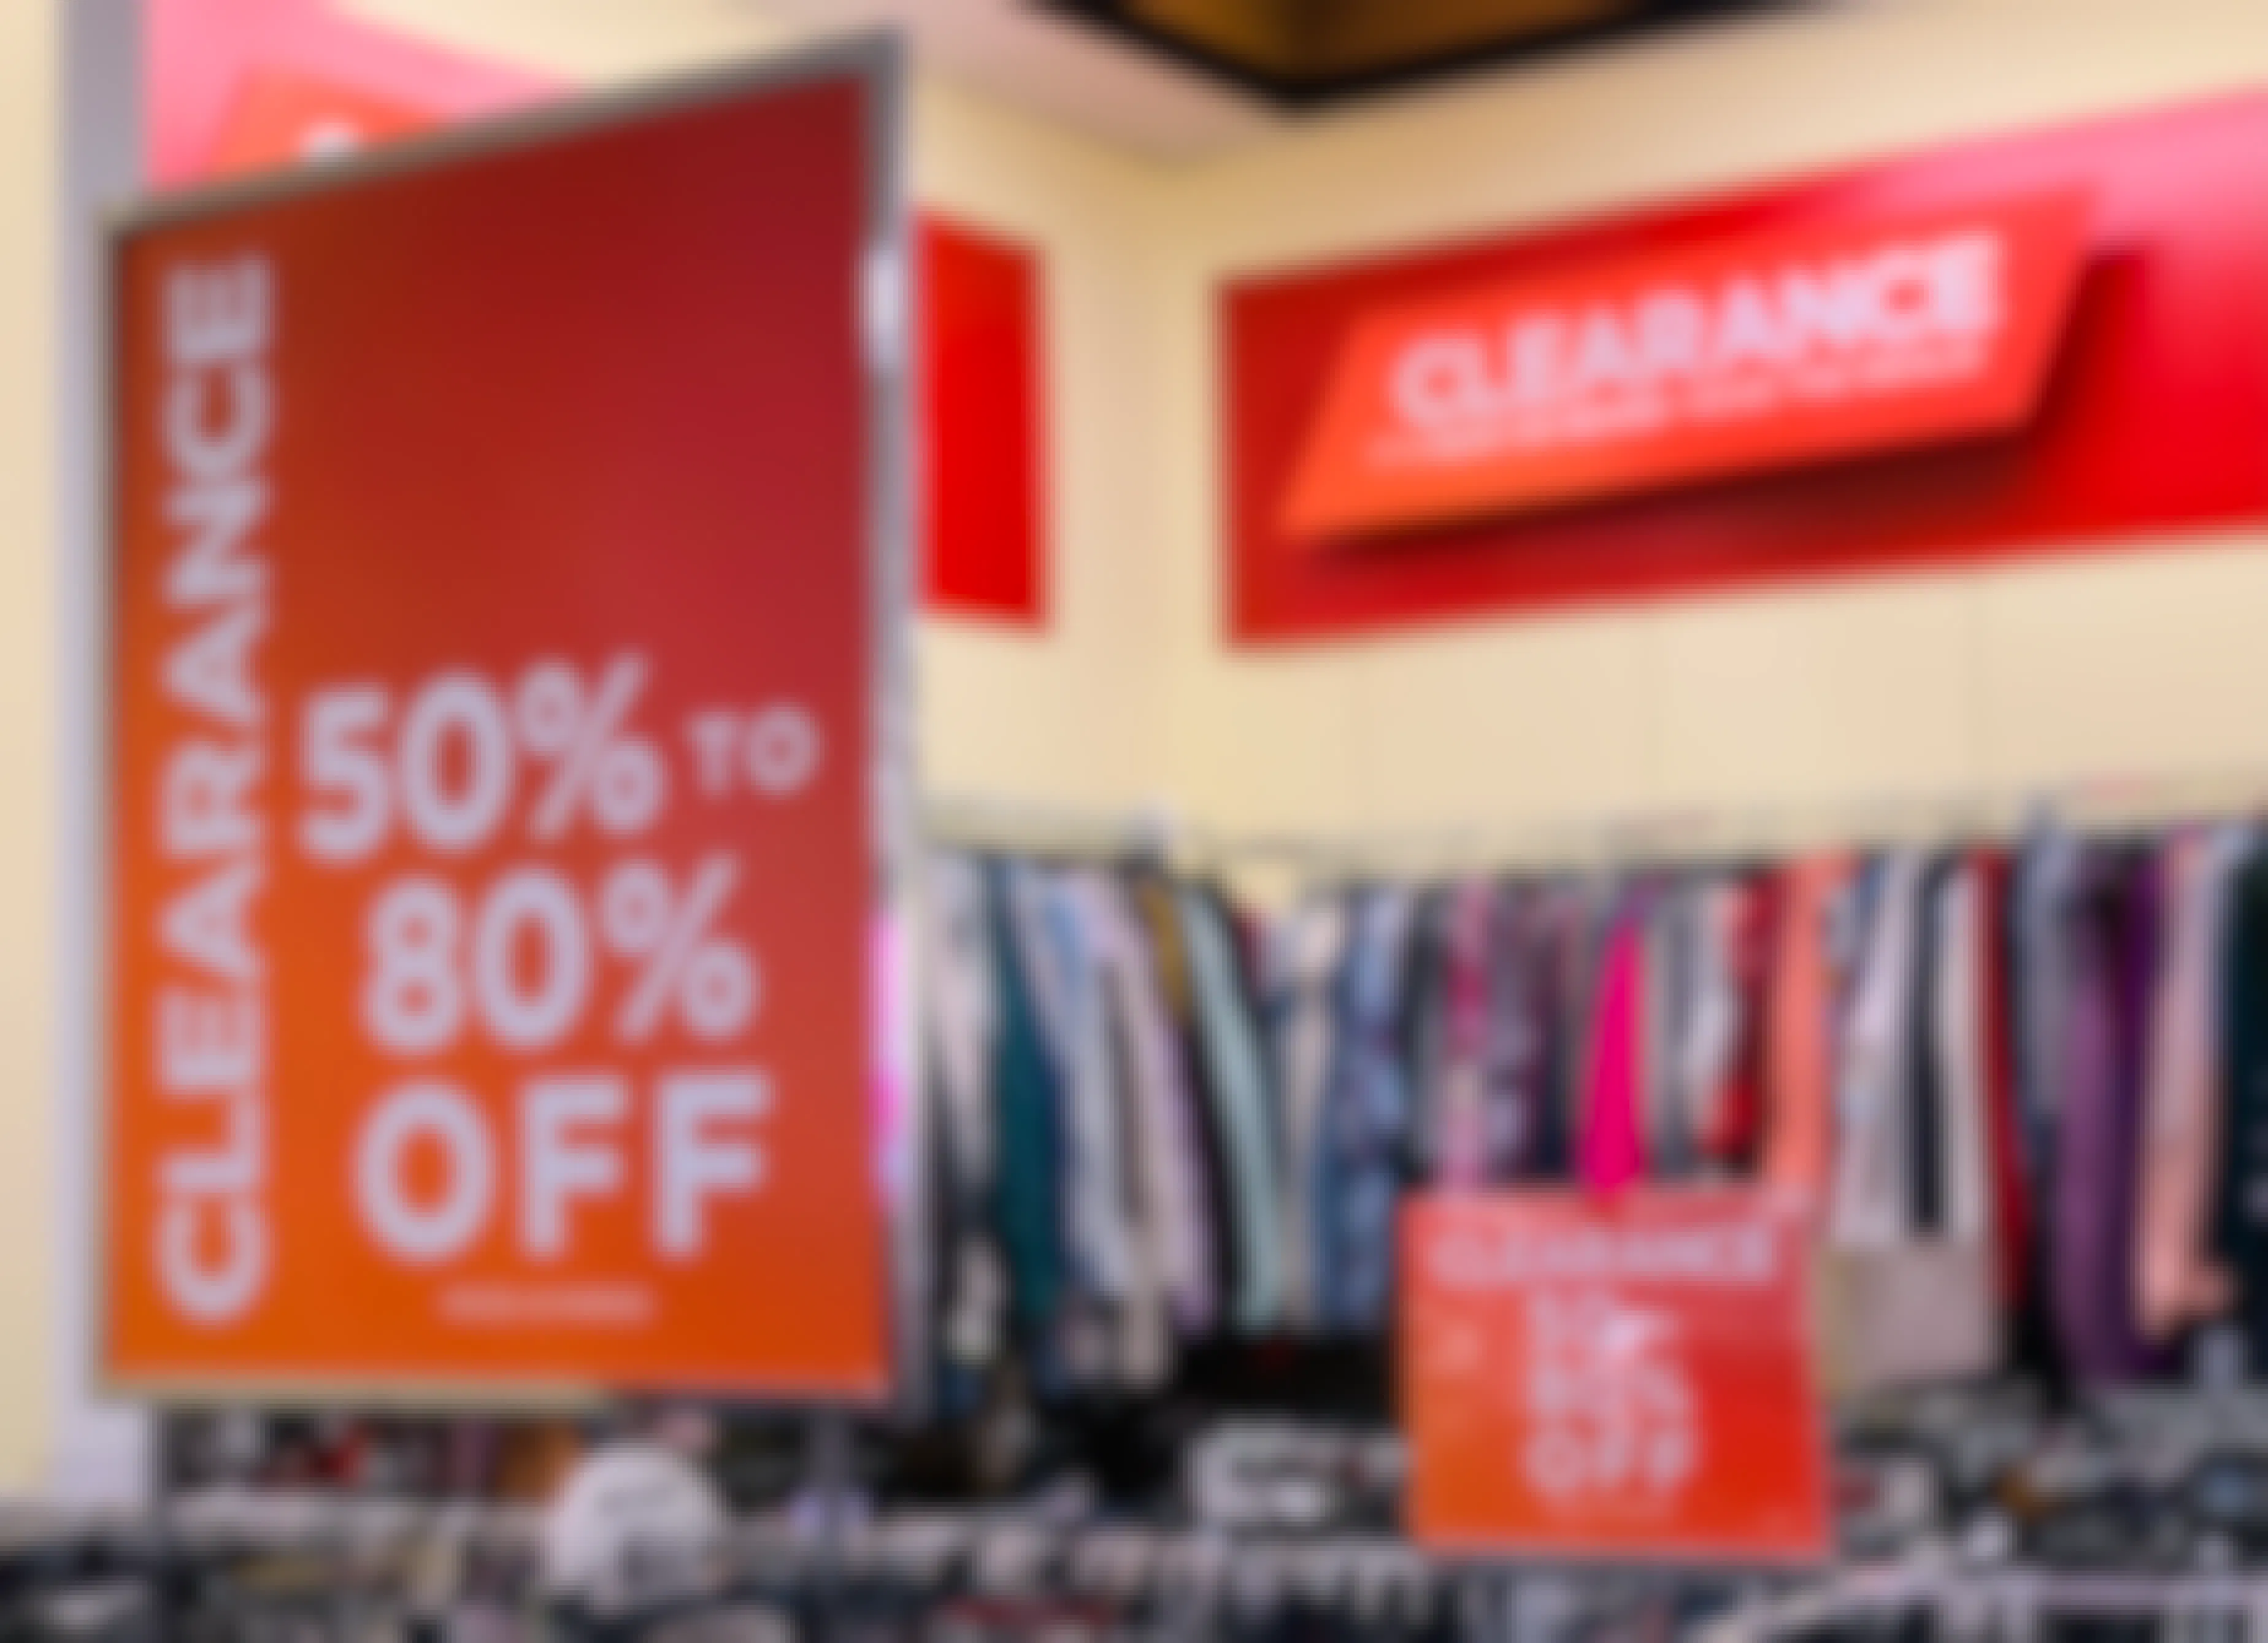 Kohls in store clearance racks with 50% to 80% off signs